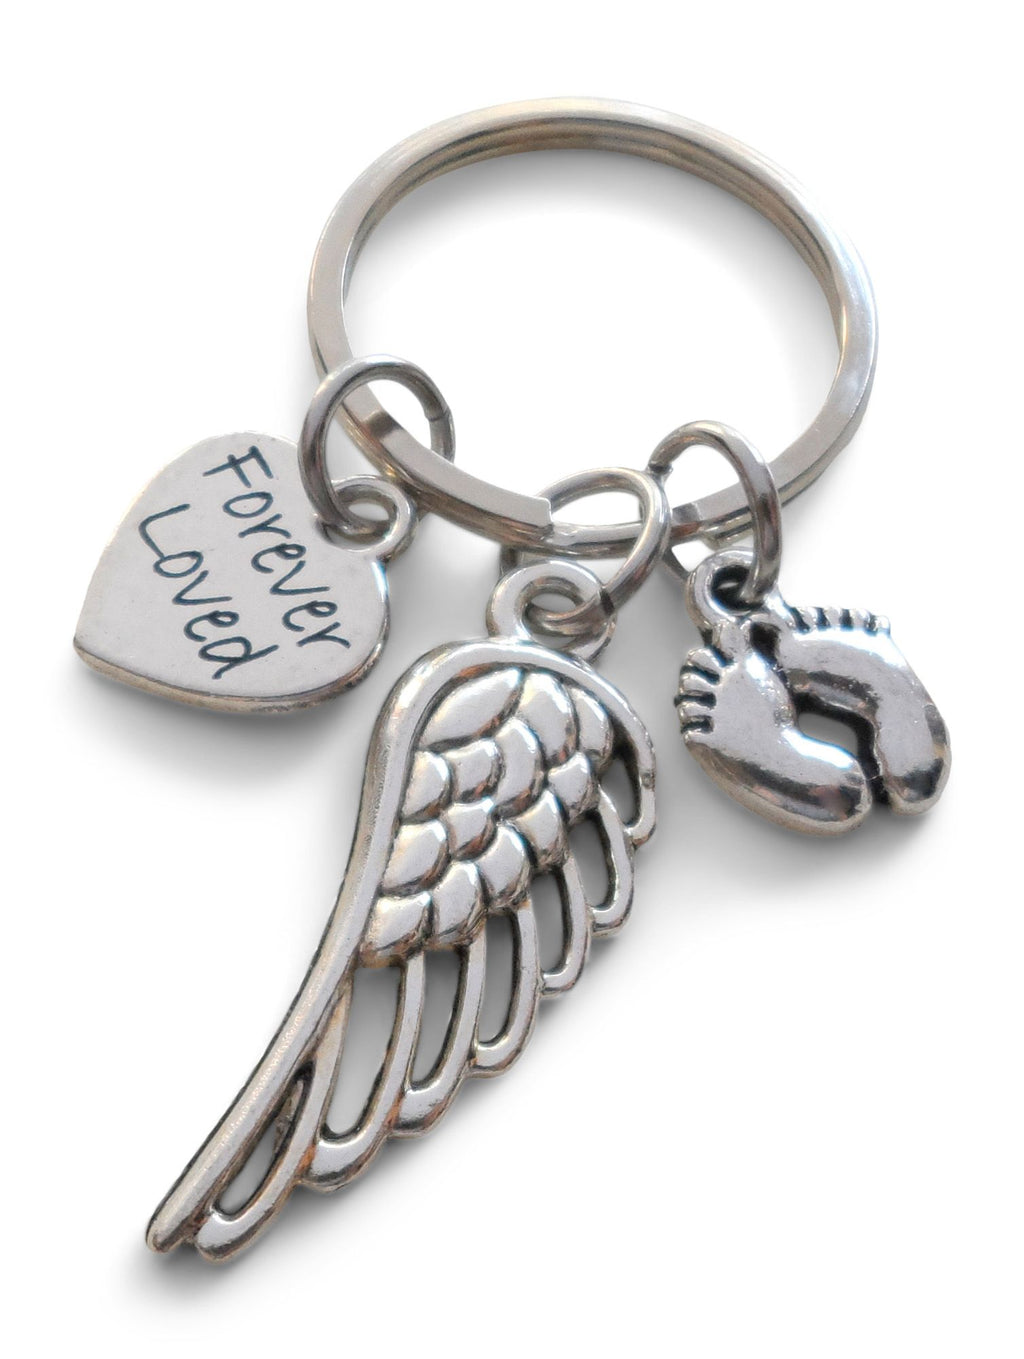 Baby Feet Charm & Wing Charm Keychain with a Forever Loved Heart Charm, Baby Loss Memorial Keychain